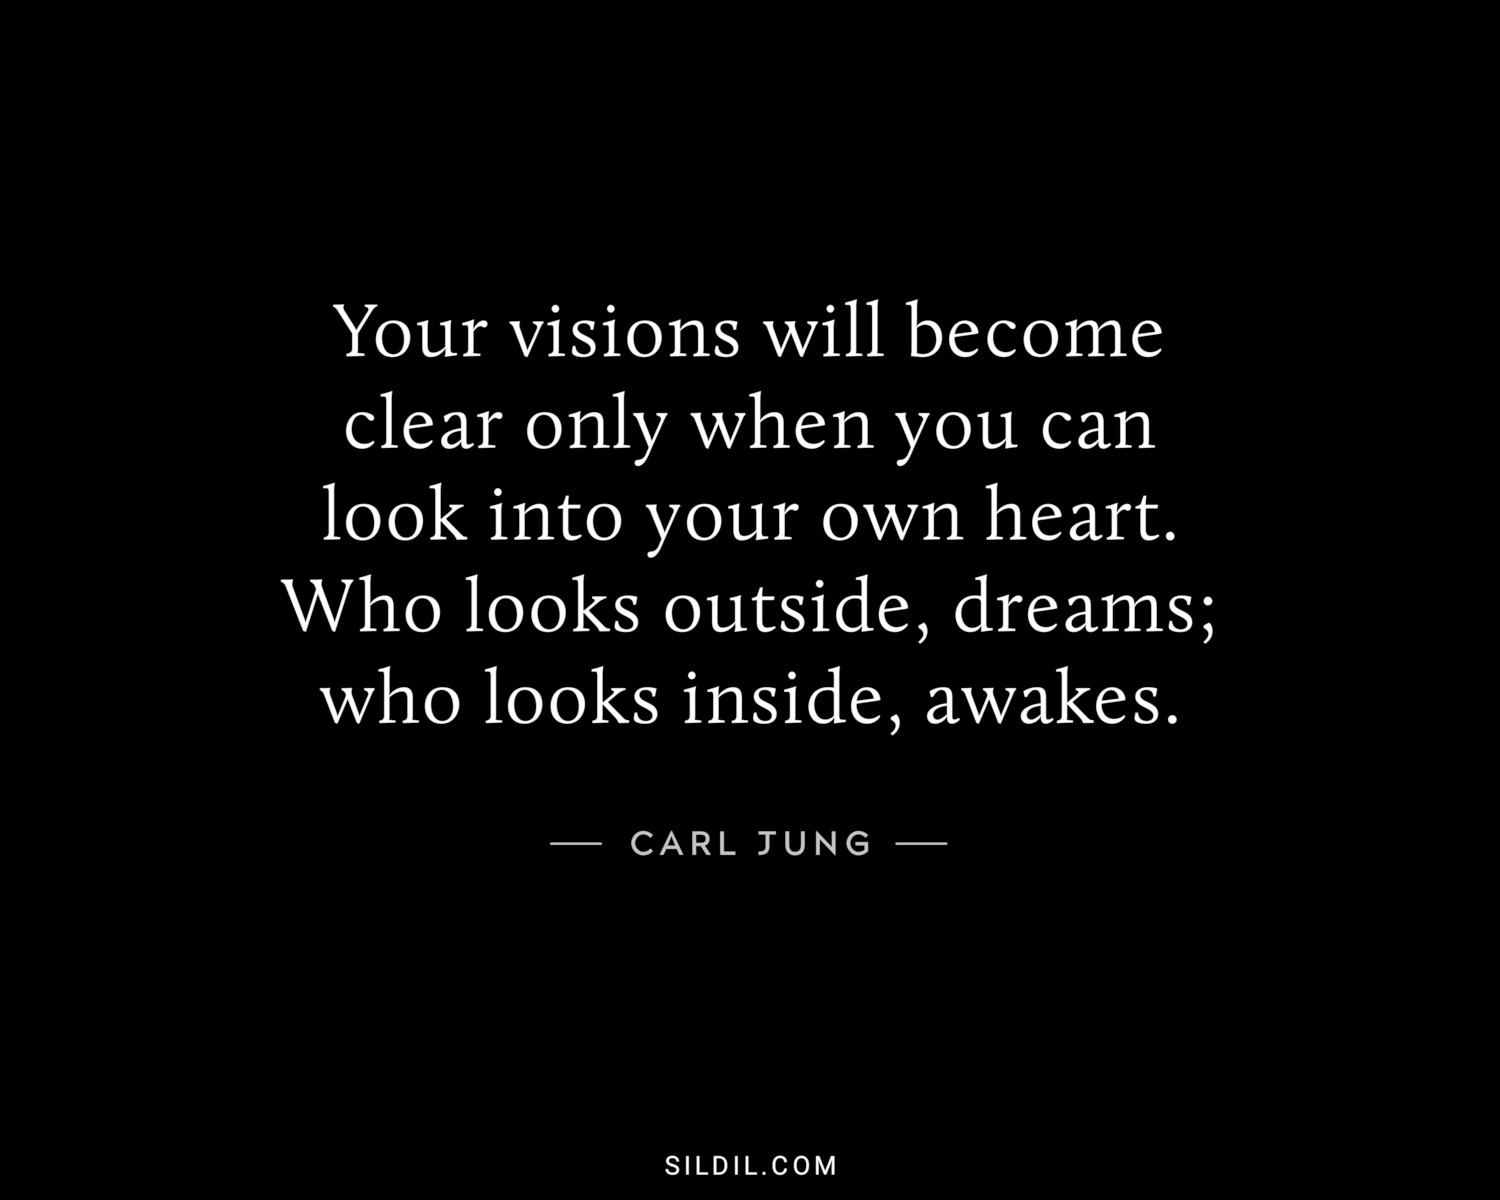 Your visions will become clear only when you can look into your own heart. Who looks outside, dreams; who looks inside, awakes.